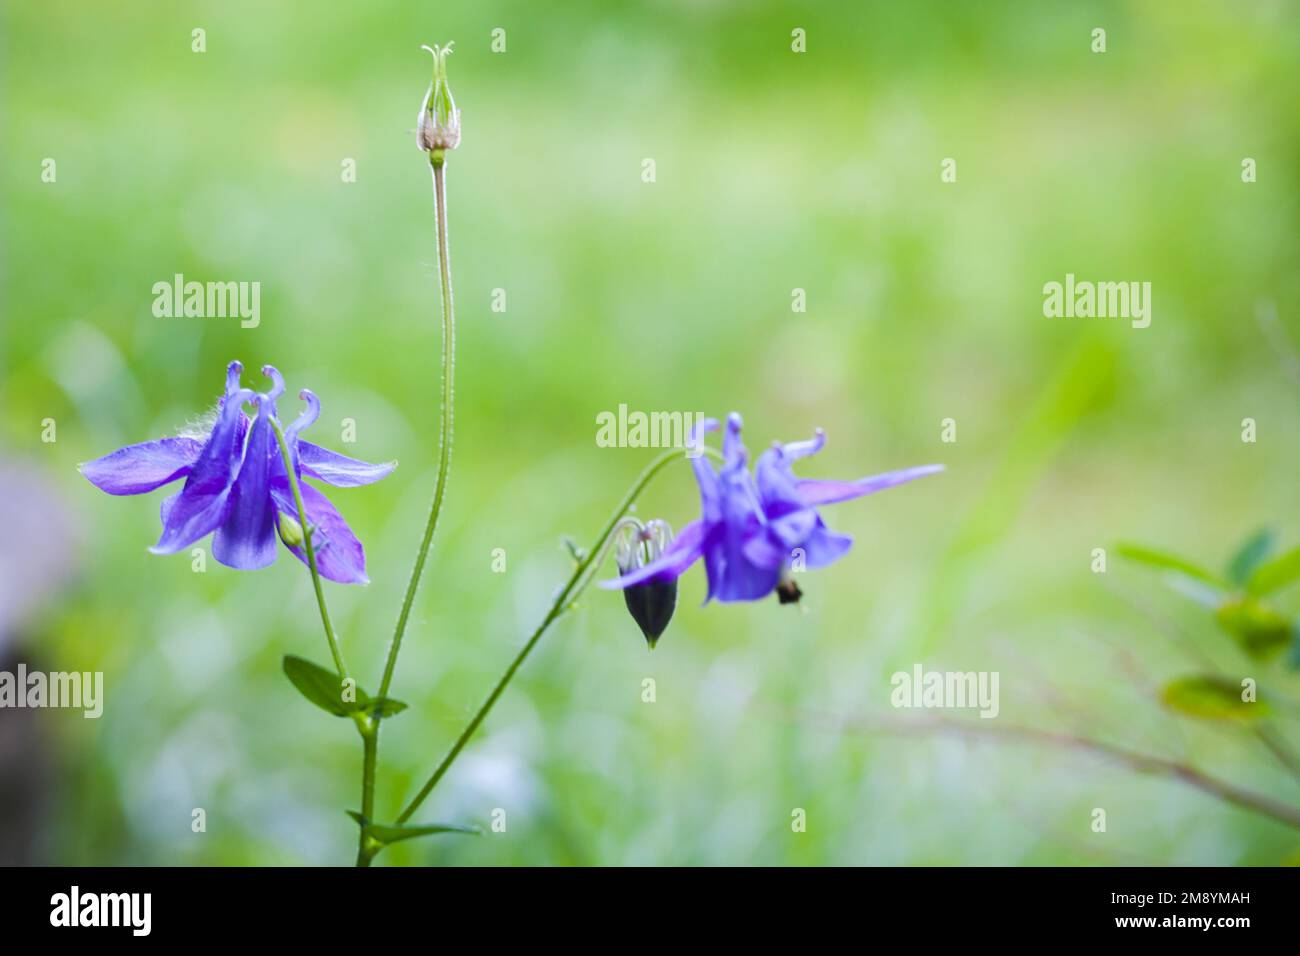 Flowers of the Aquilegia vulgaris, it is a species of columbine native to Europe also known as European columbine, common columbine, grannys nightcap, Stock Photo